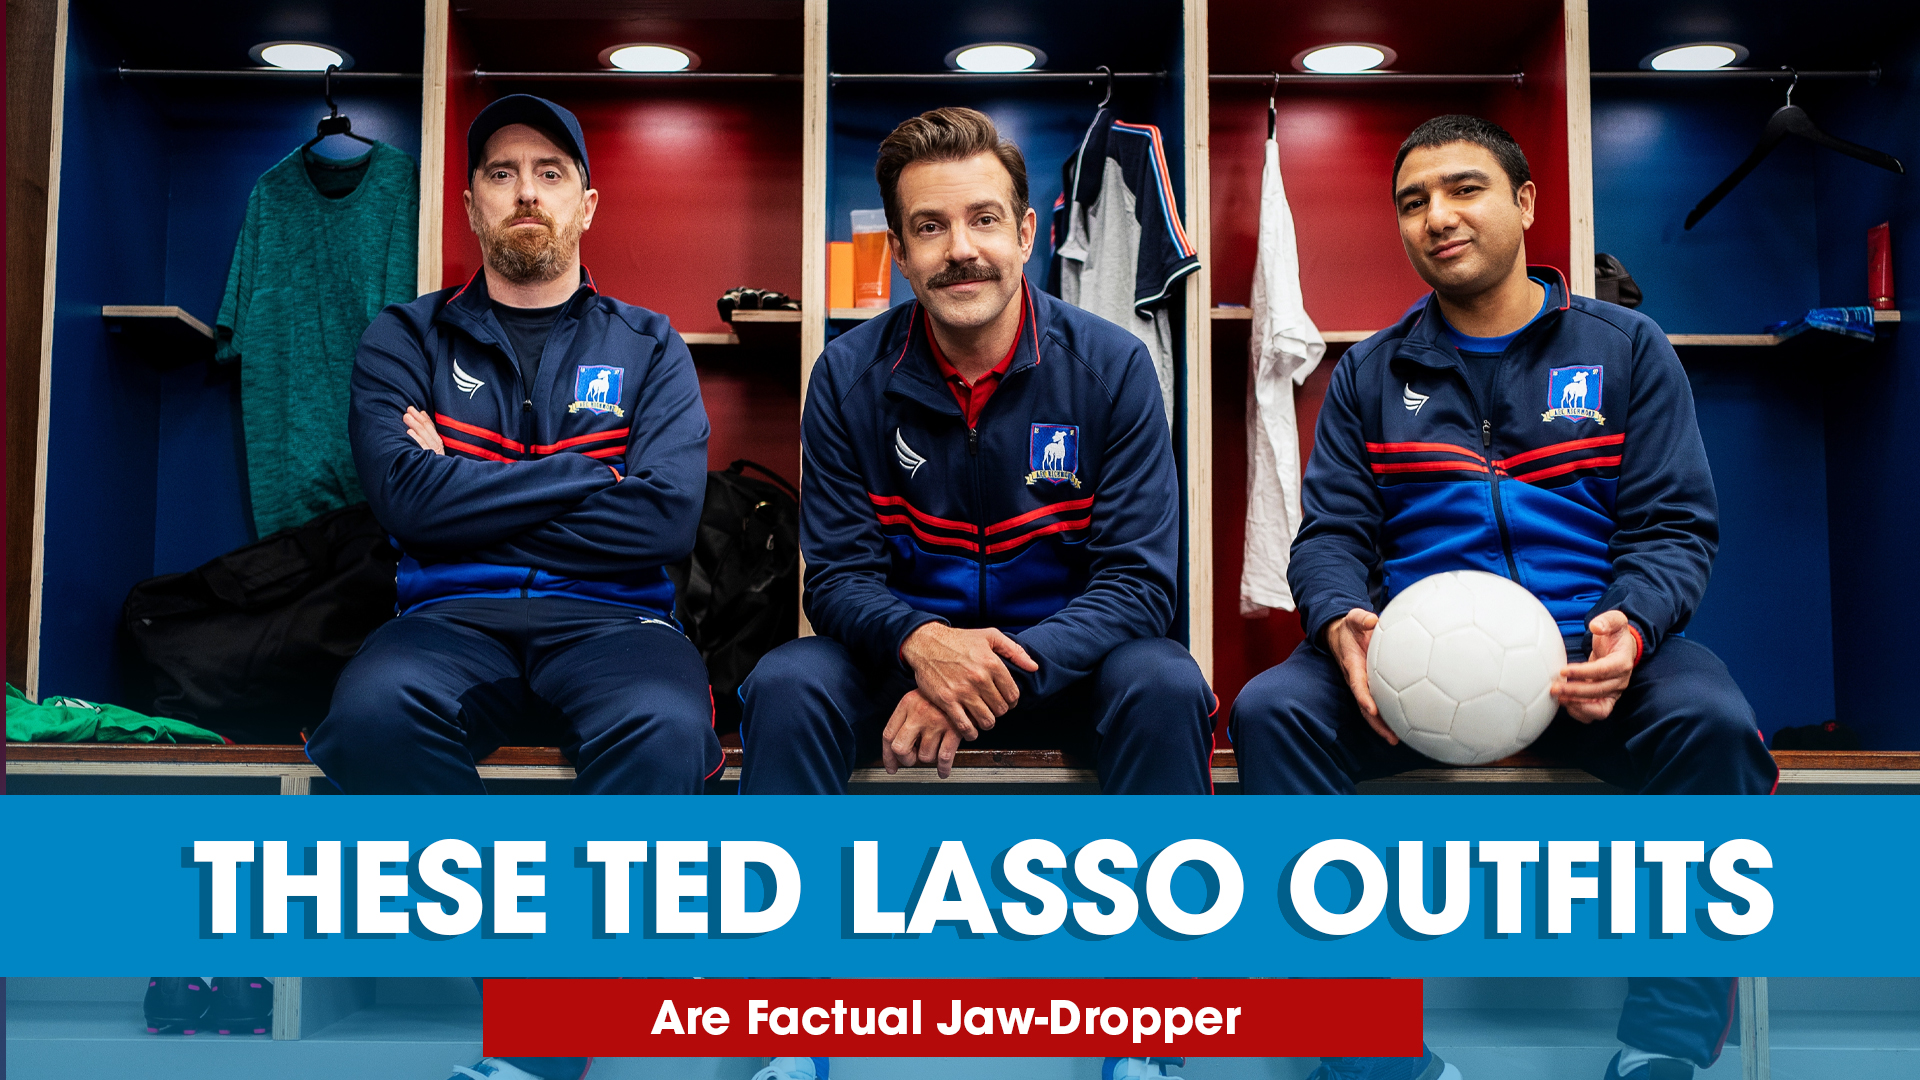 These Ted Lasso Outfits Are Factual Jaw-Dropper